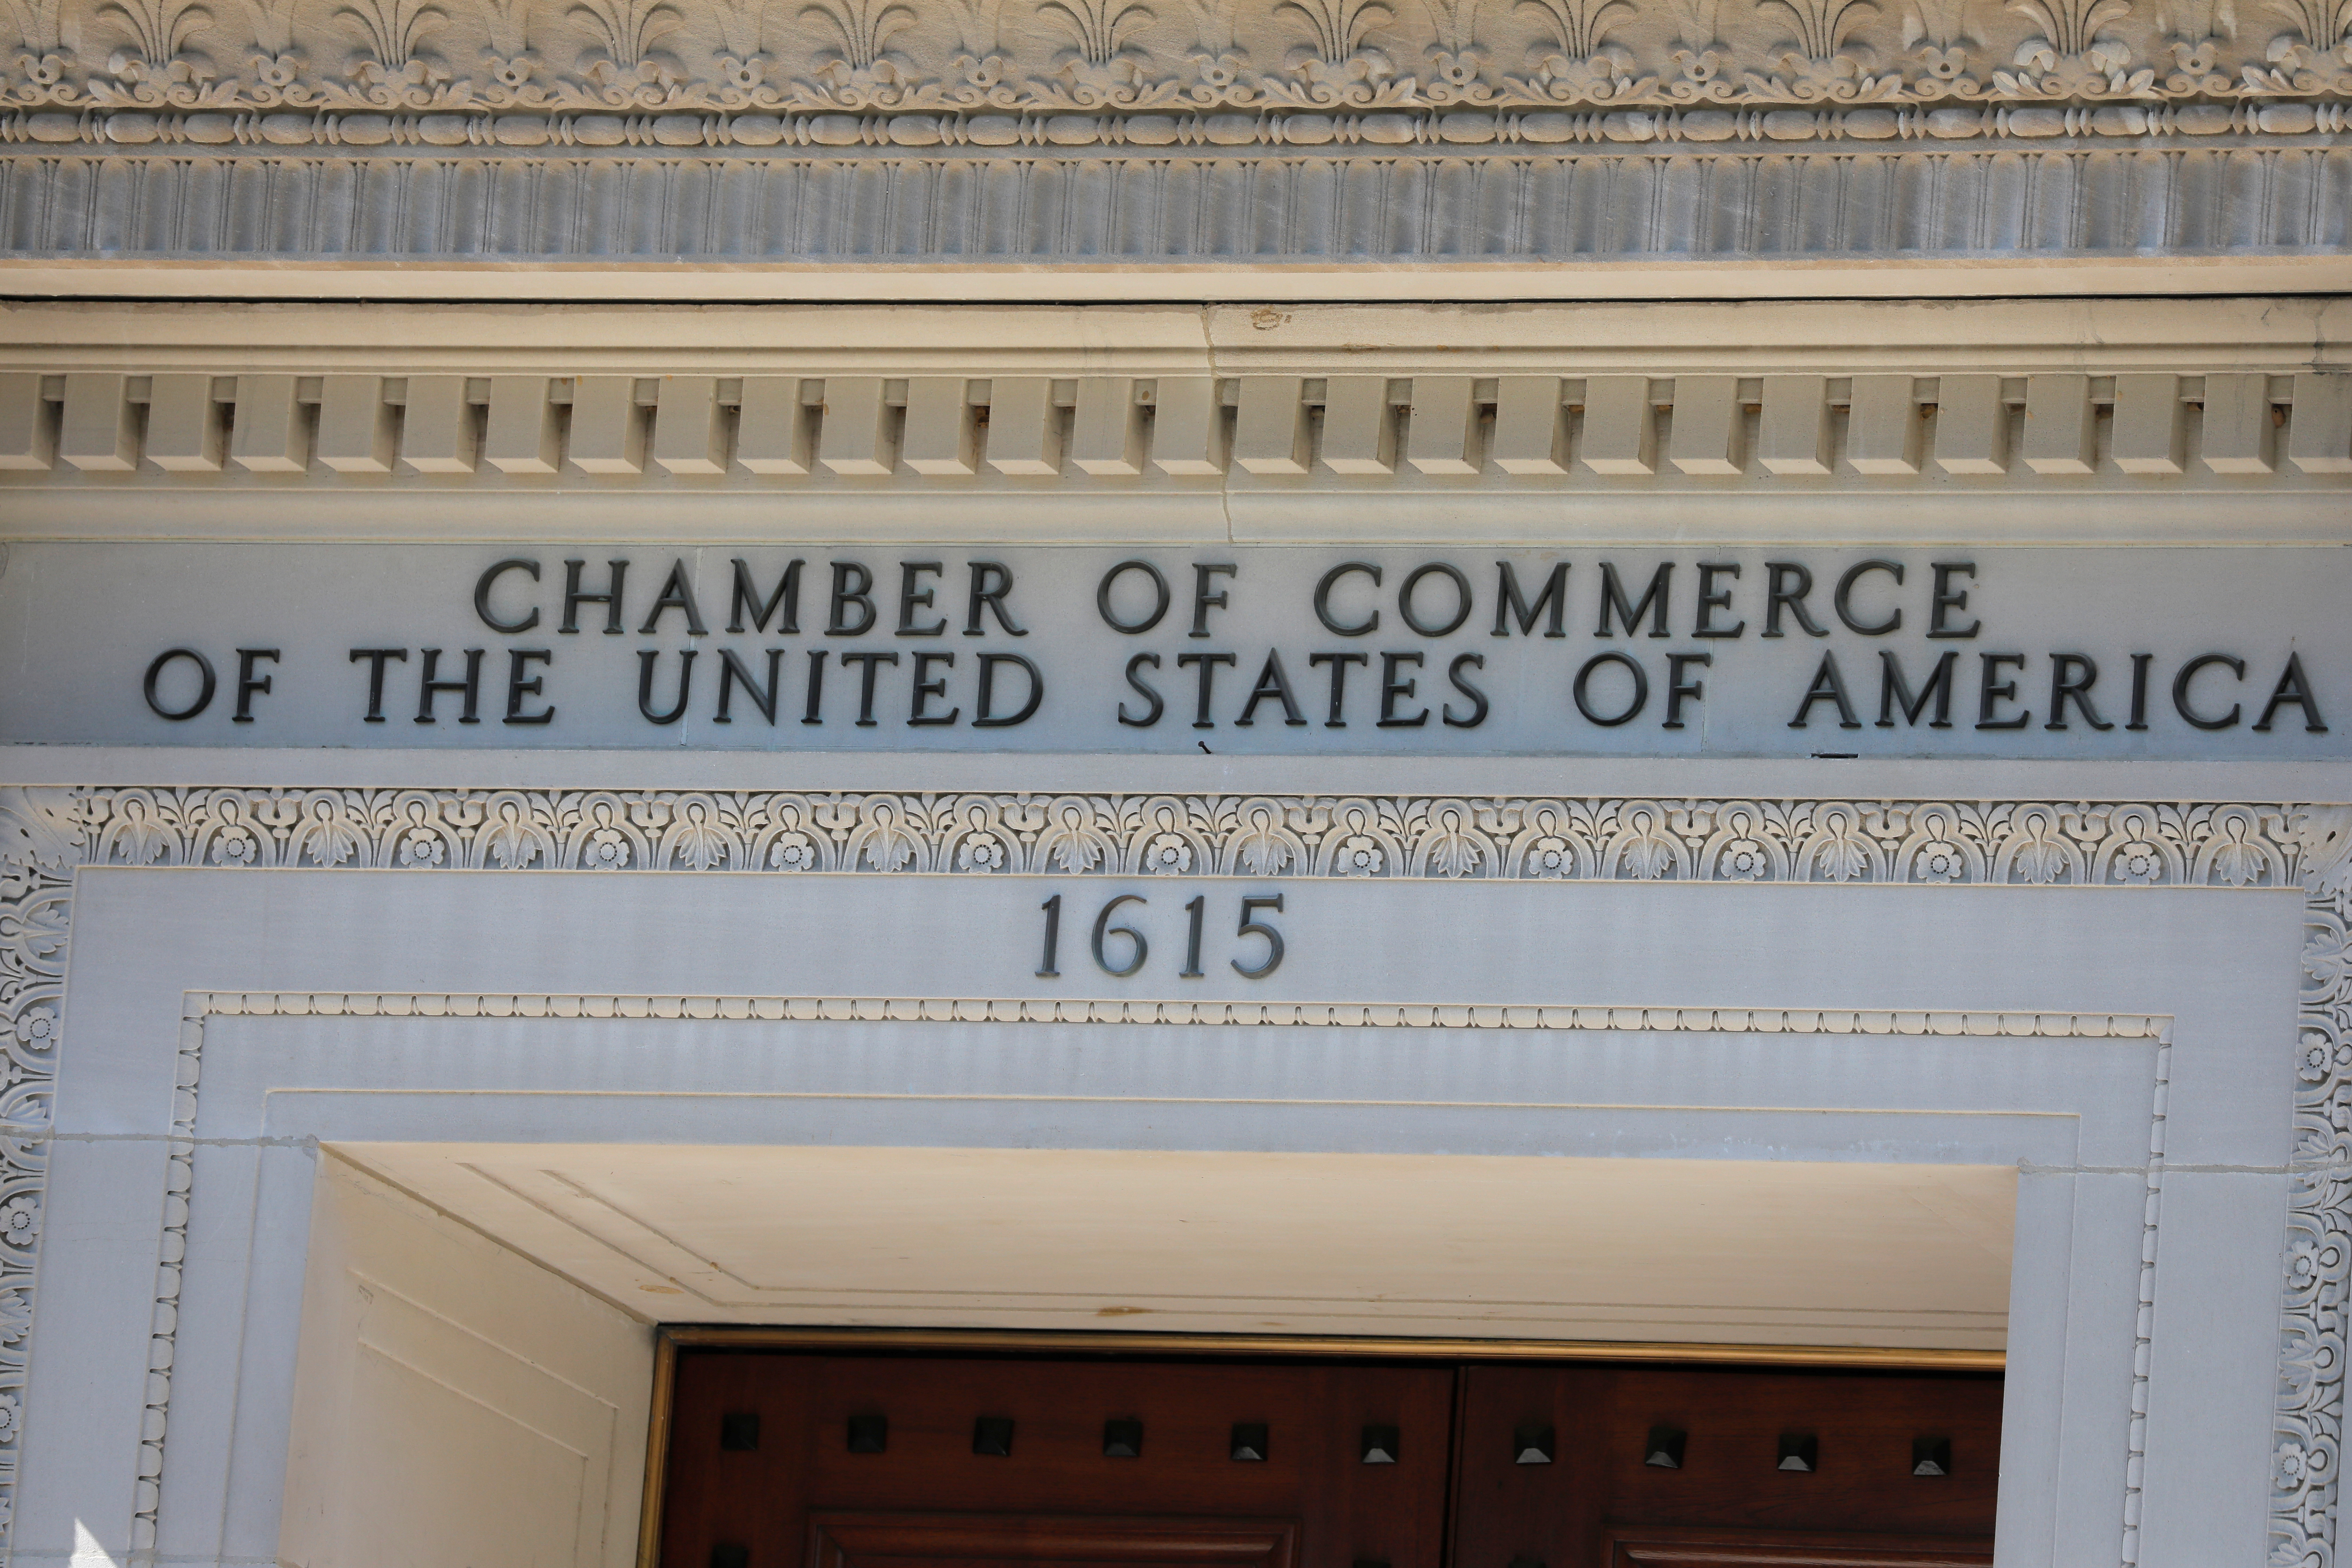 The United States Chamber of Commerce building is seen in Washington, D.C., U.S., May 10, 2021. REUTERS/Andrew Kelly